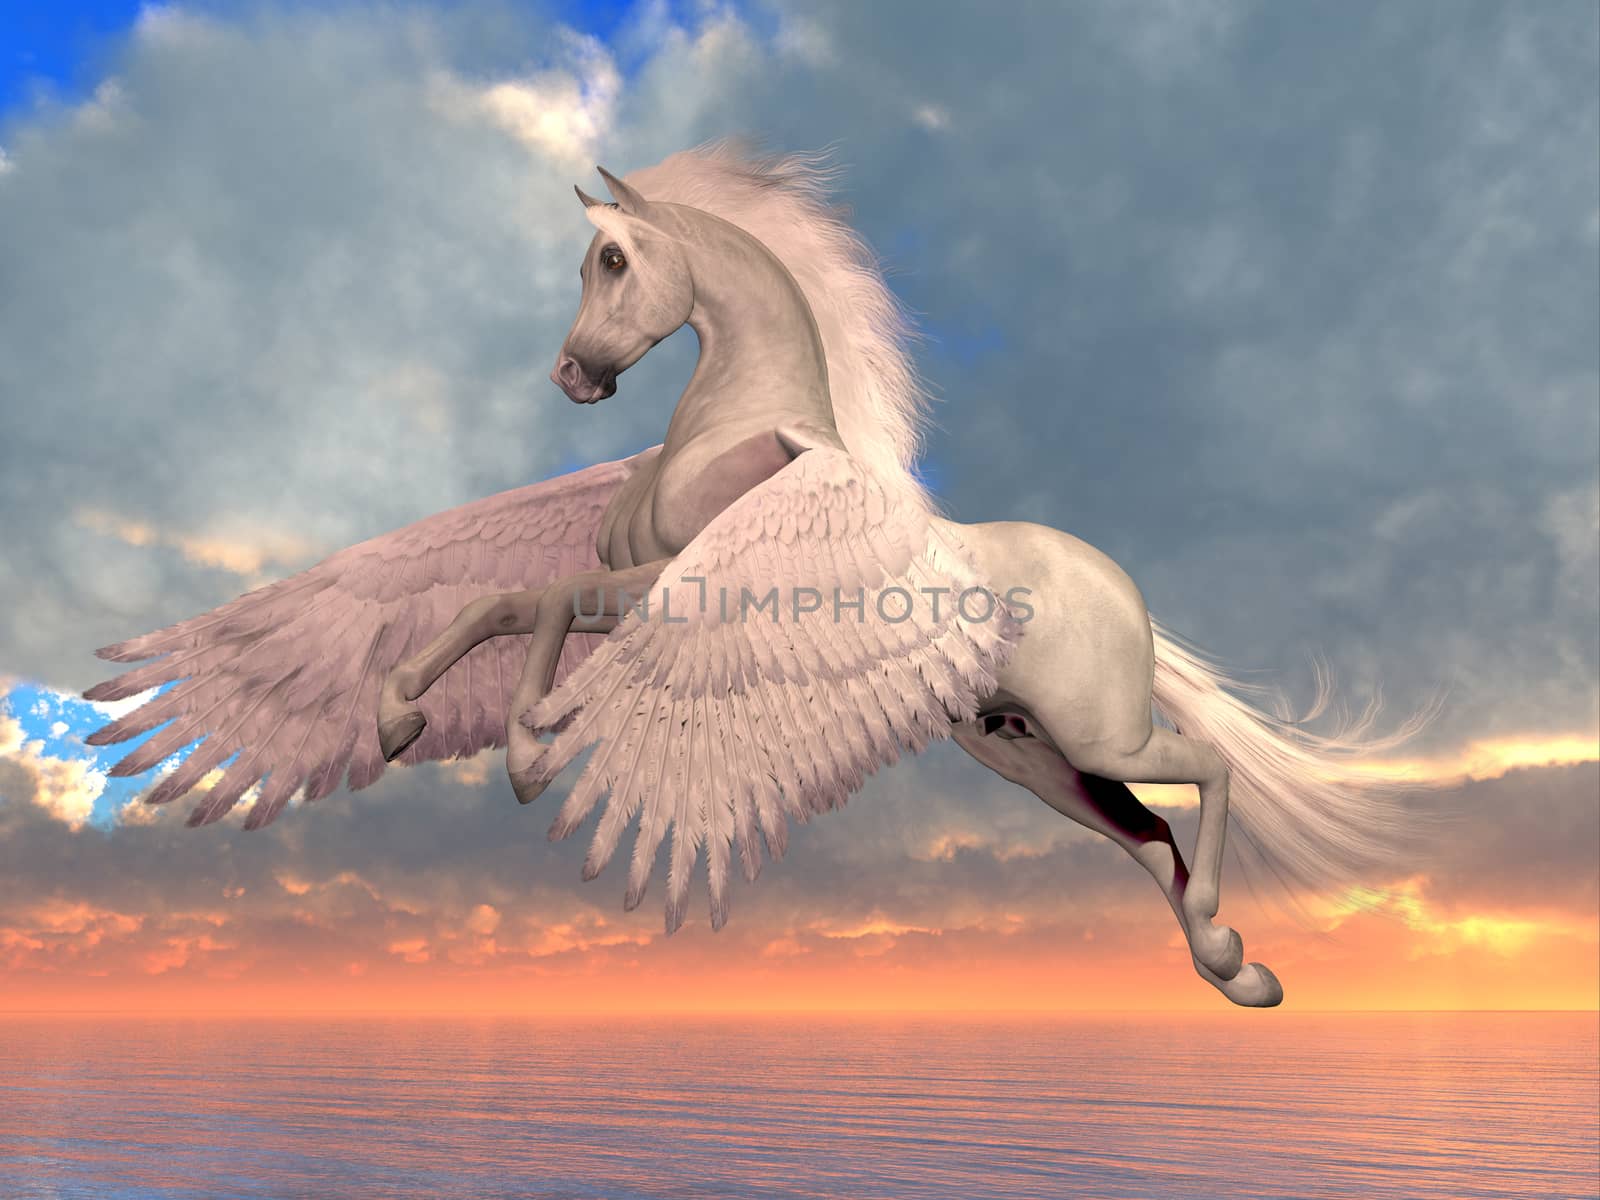 An Arabian Pegasus horse rises on powerful wings to fly over the ocean on a sunny day.